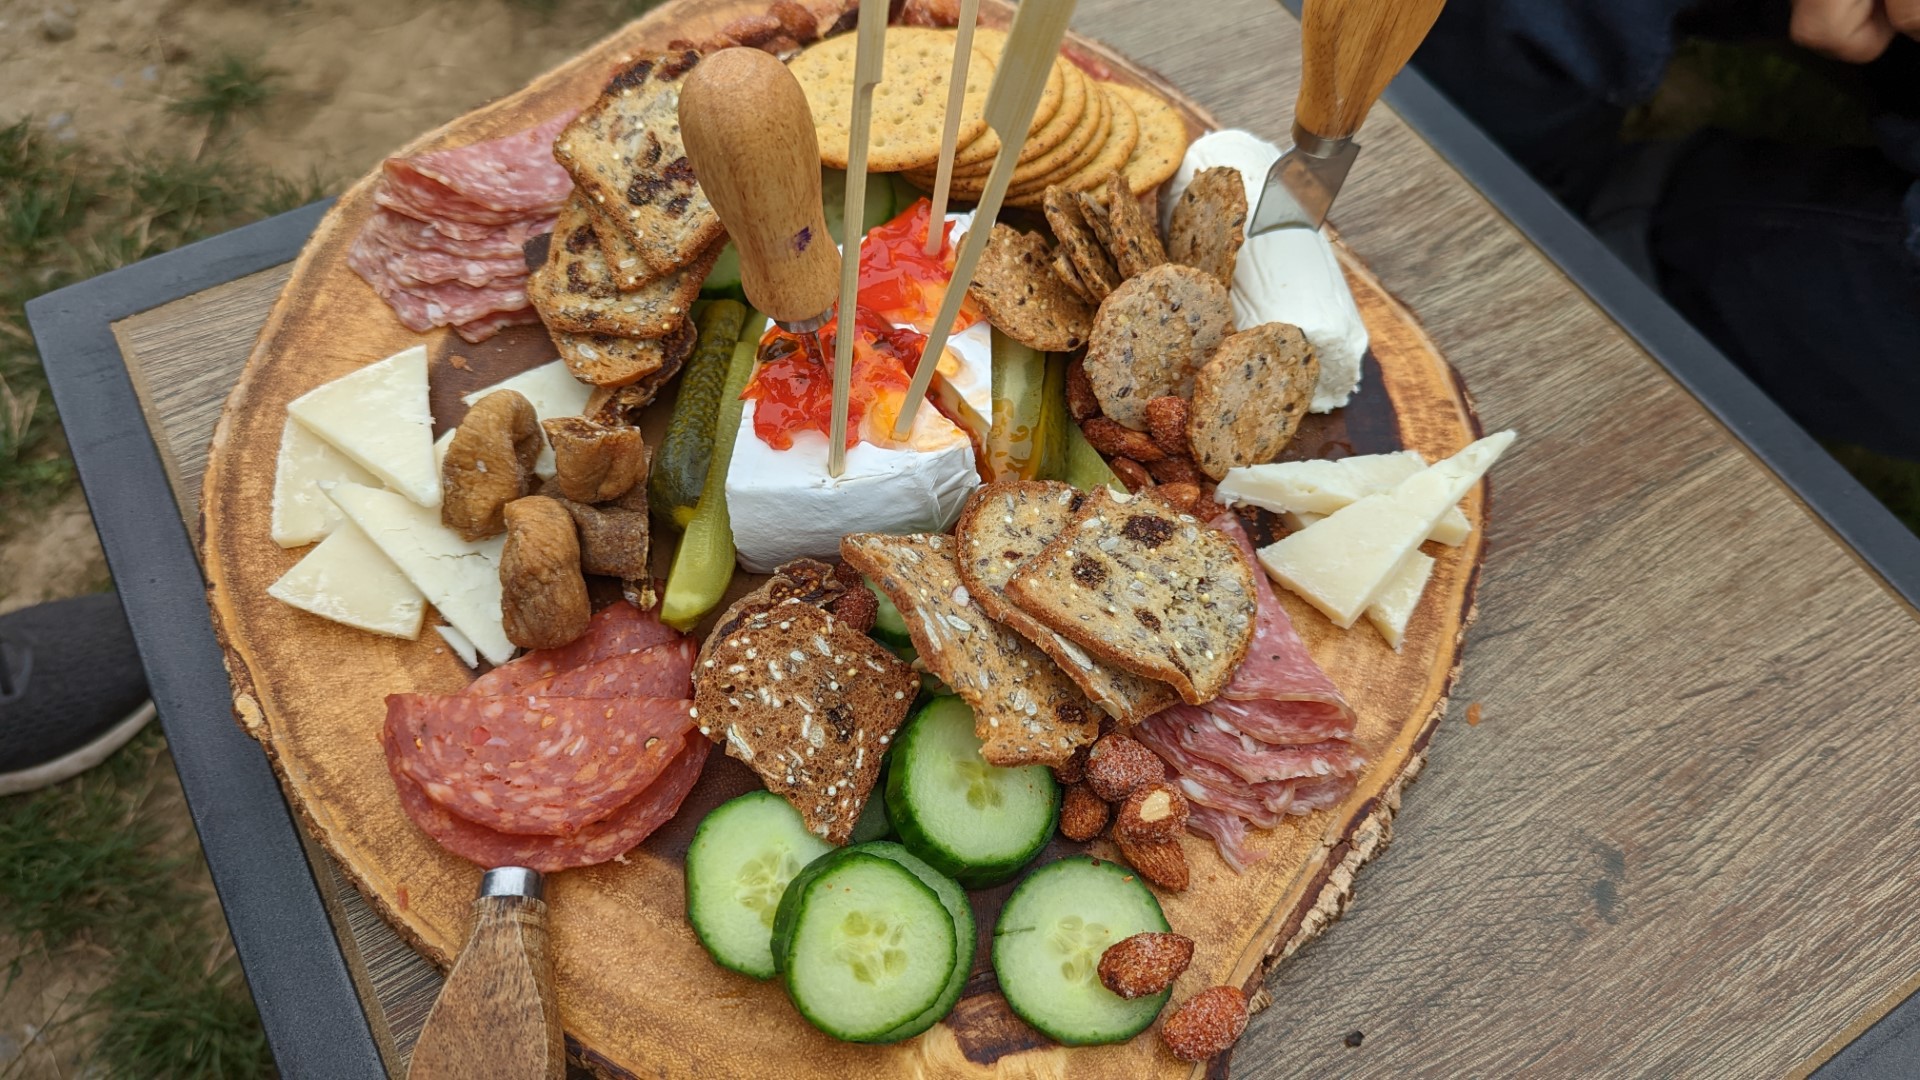 3 person charcuterie board at Rolling grape winery